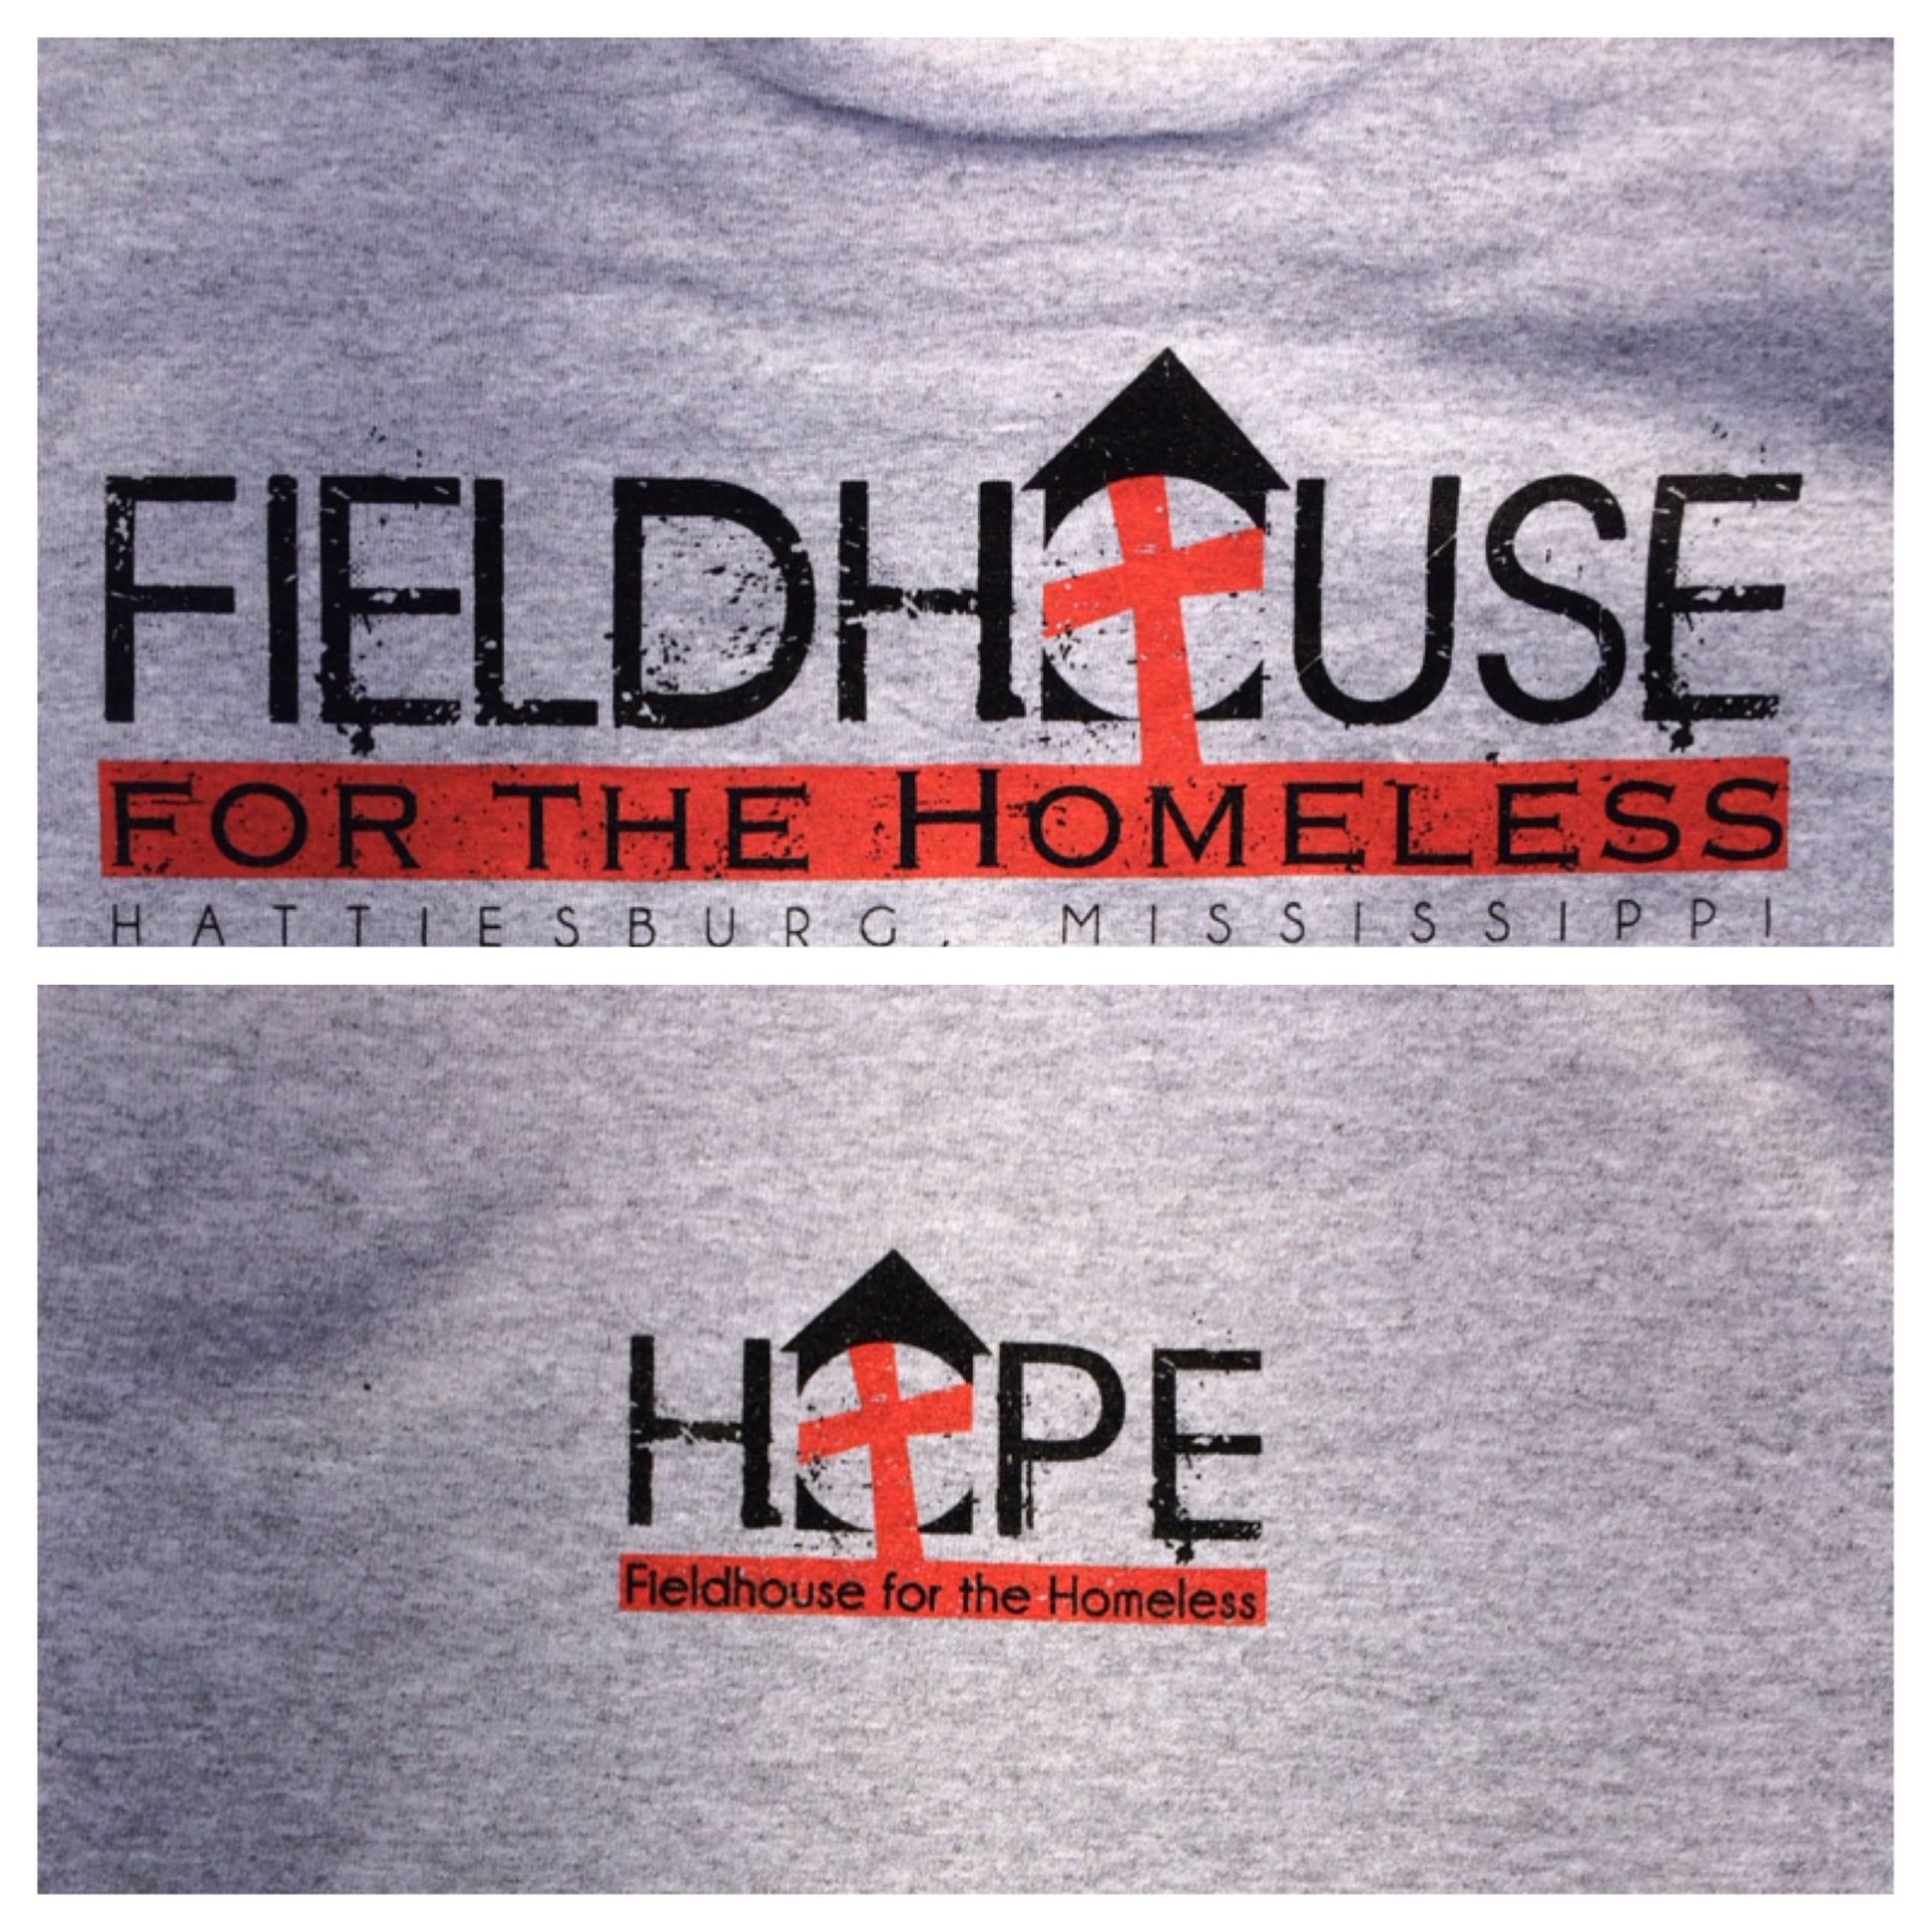 The Fieldhouse for the Homeless Day Resource Shelter